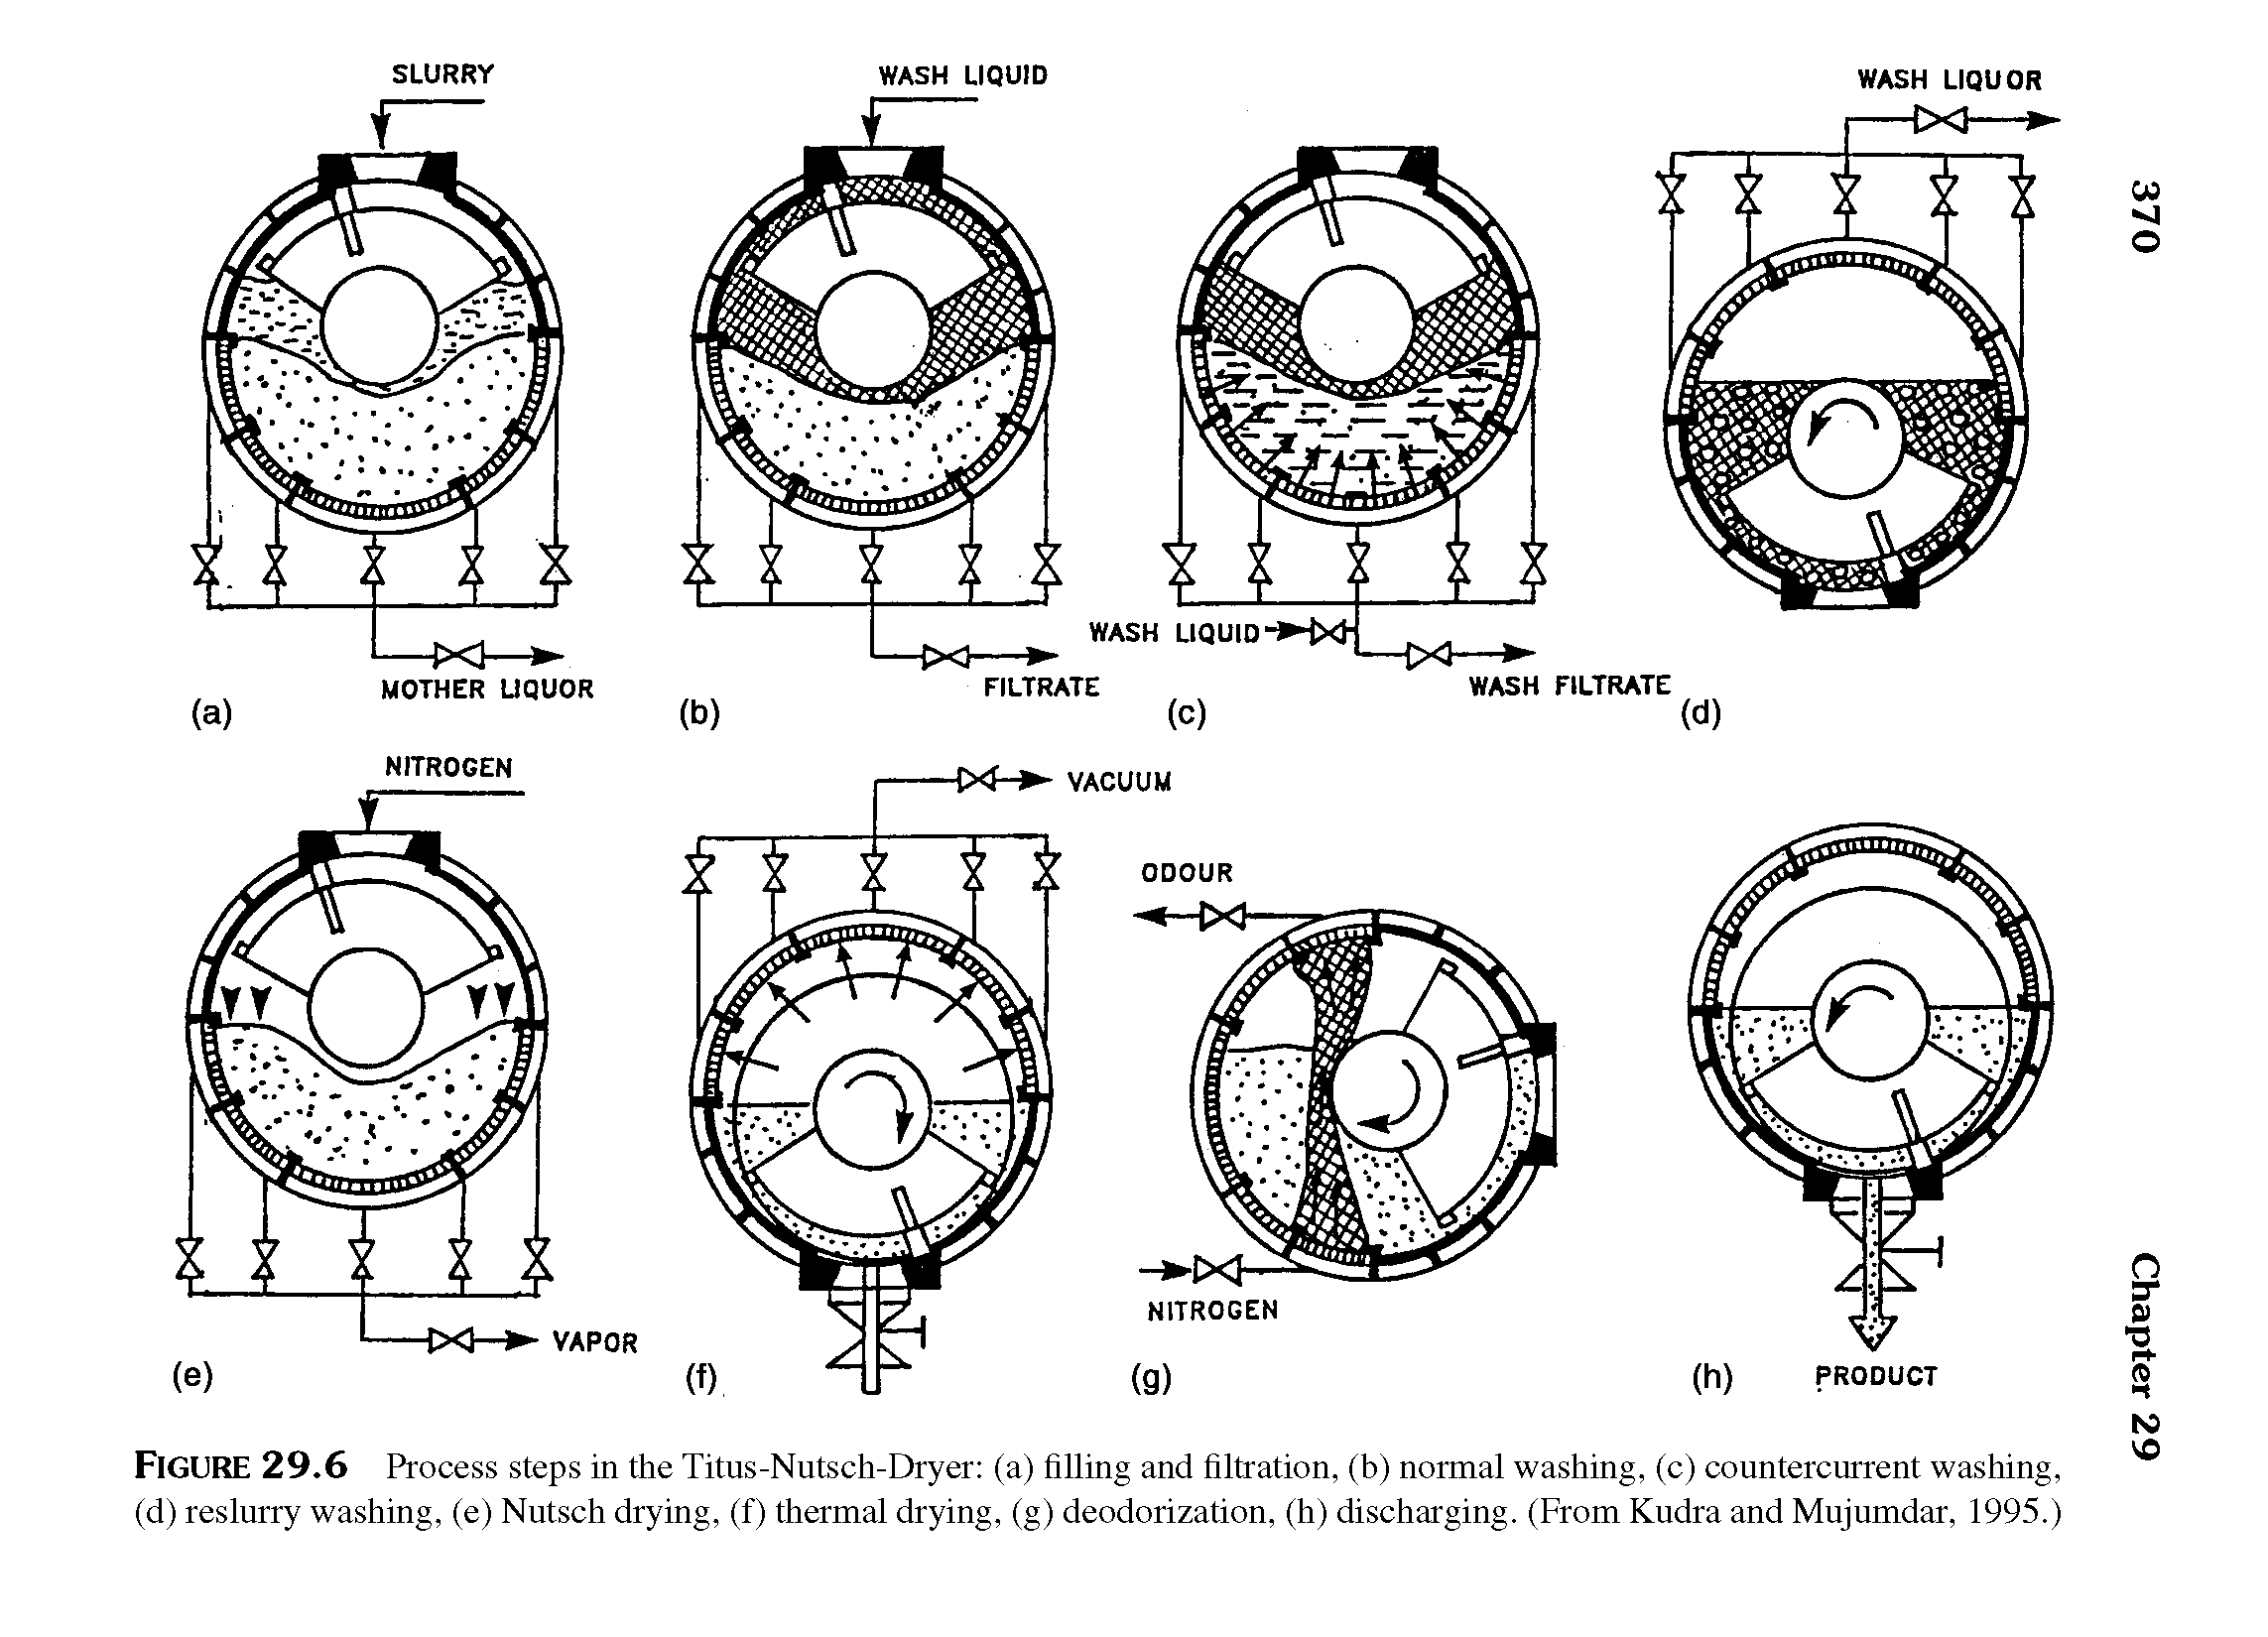 Figure 29.6 Process steps in the Titus-Nutsch-Dryer (a) filling and filtration, (b) normal washing, (c) countercurrent washing, (d) reslurry washing, (e) Nutsch drying, (f) thermal drying, (g) deodorization, (h) discharging. (From Kudra and Mujumdar, 1995.)...